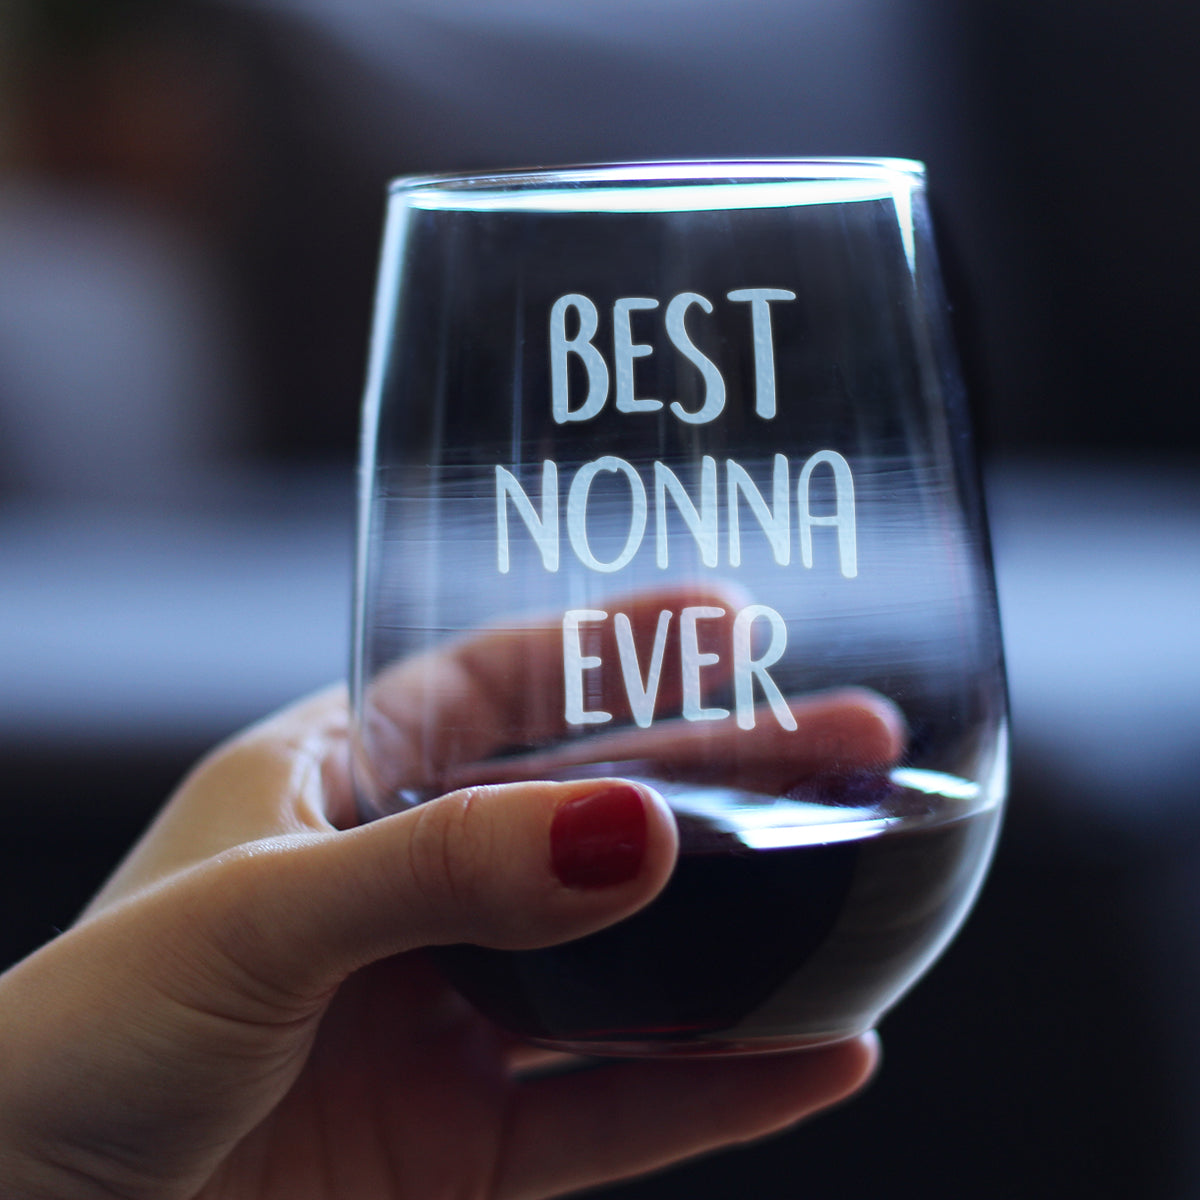 Best Nonna Ever Cute Stemless Wine Glass, Large 17 Ounce Size, Etched Sayings, Mother&#39;s Day or Birthday Gift for Grandma